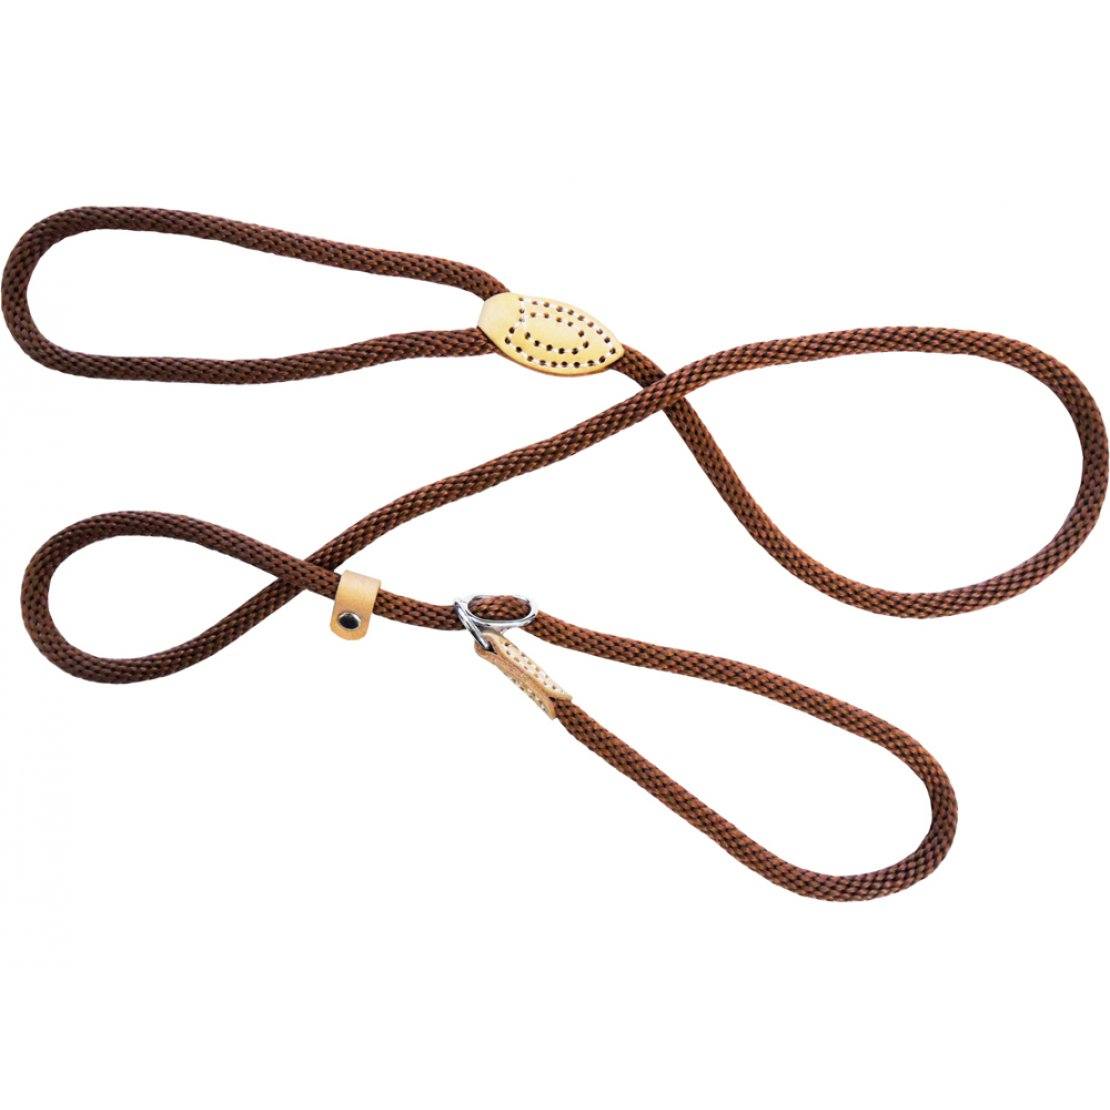 Dog & Co Supersoft Rope Slip Lead | FREE delivery available